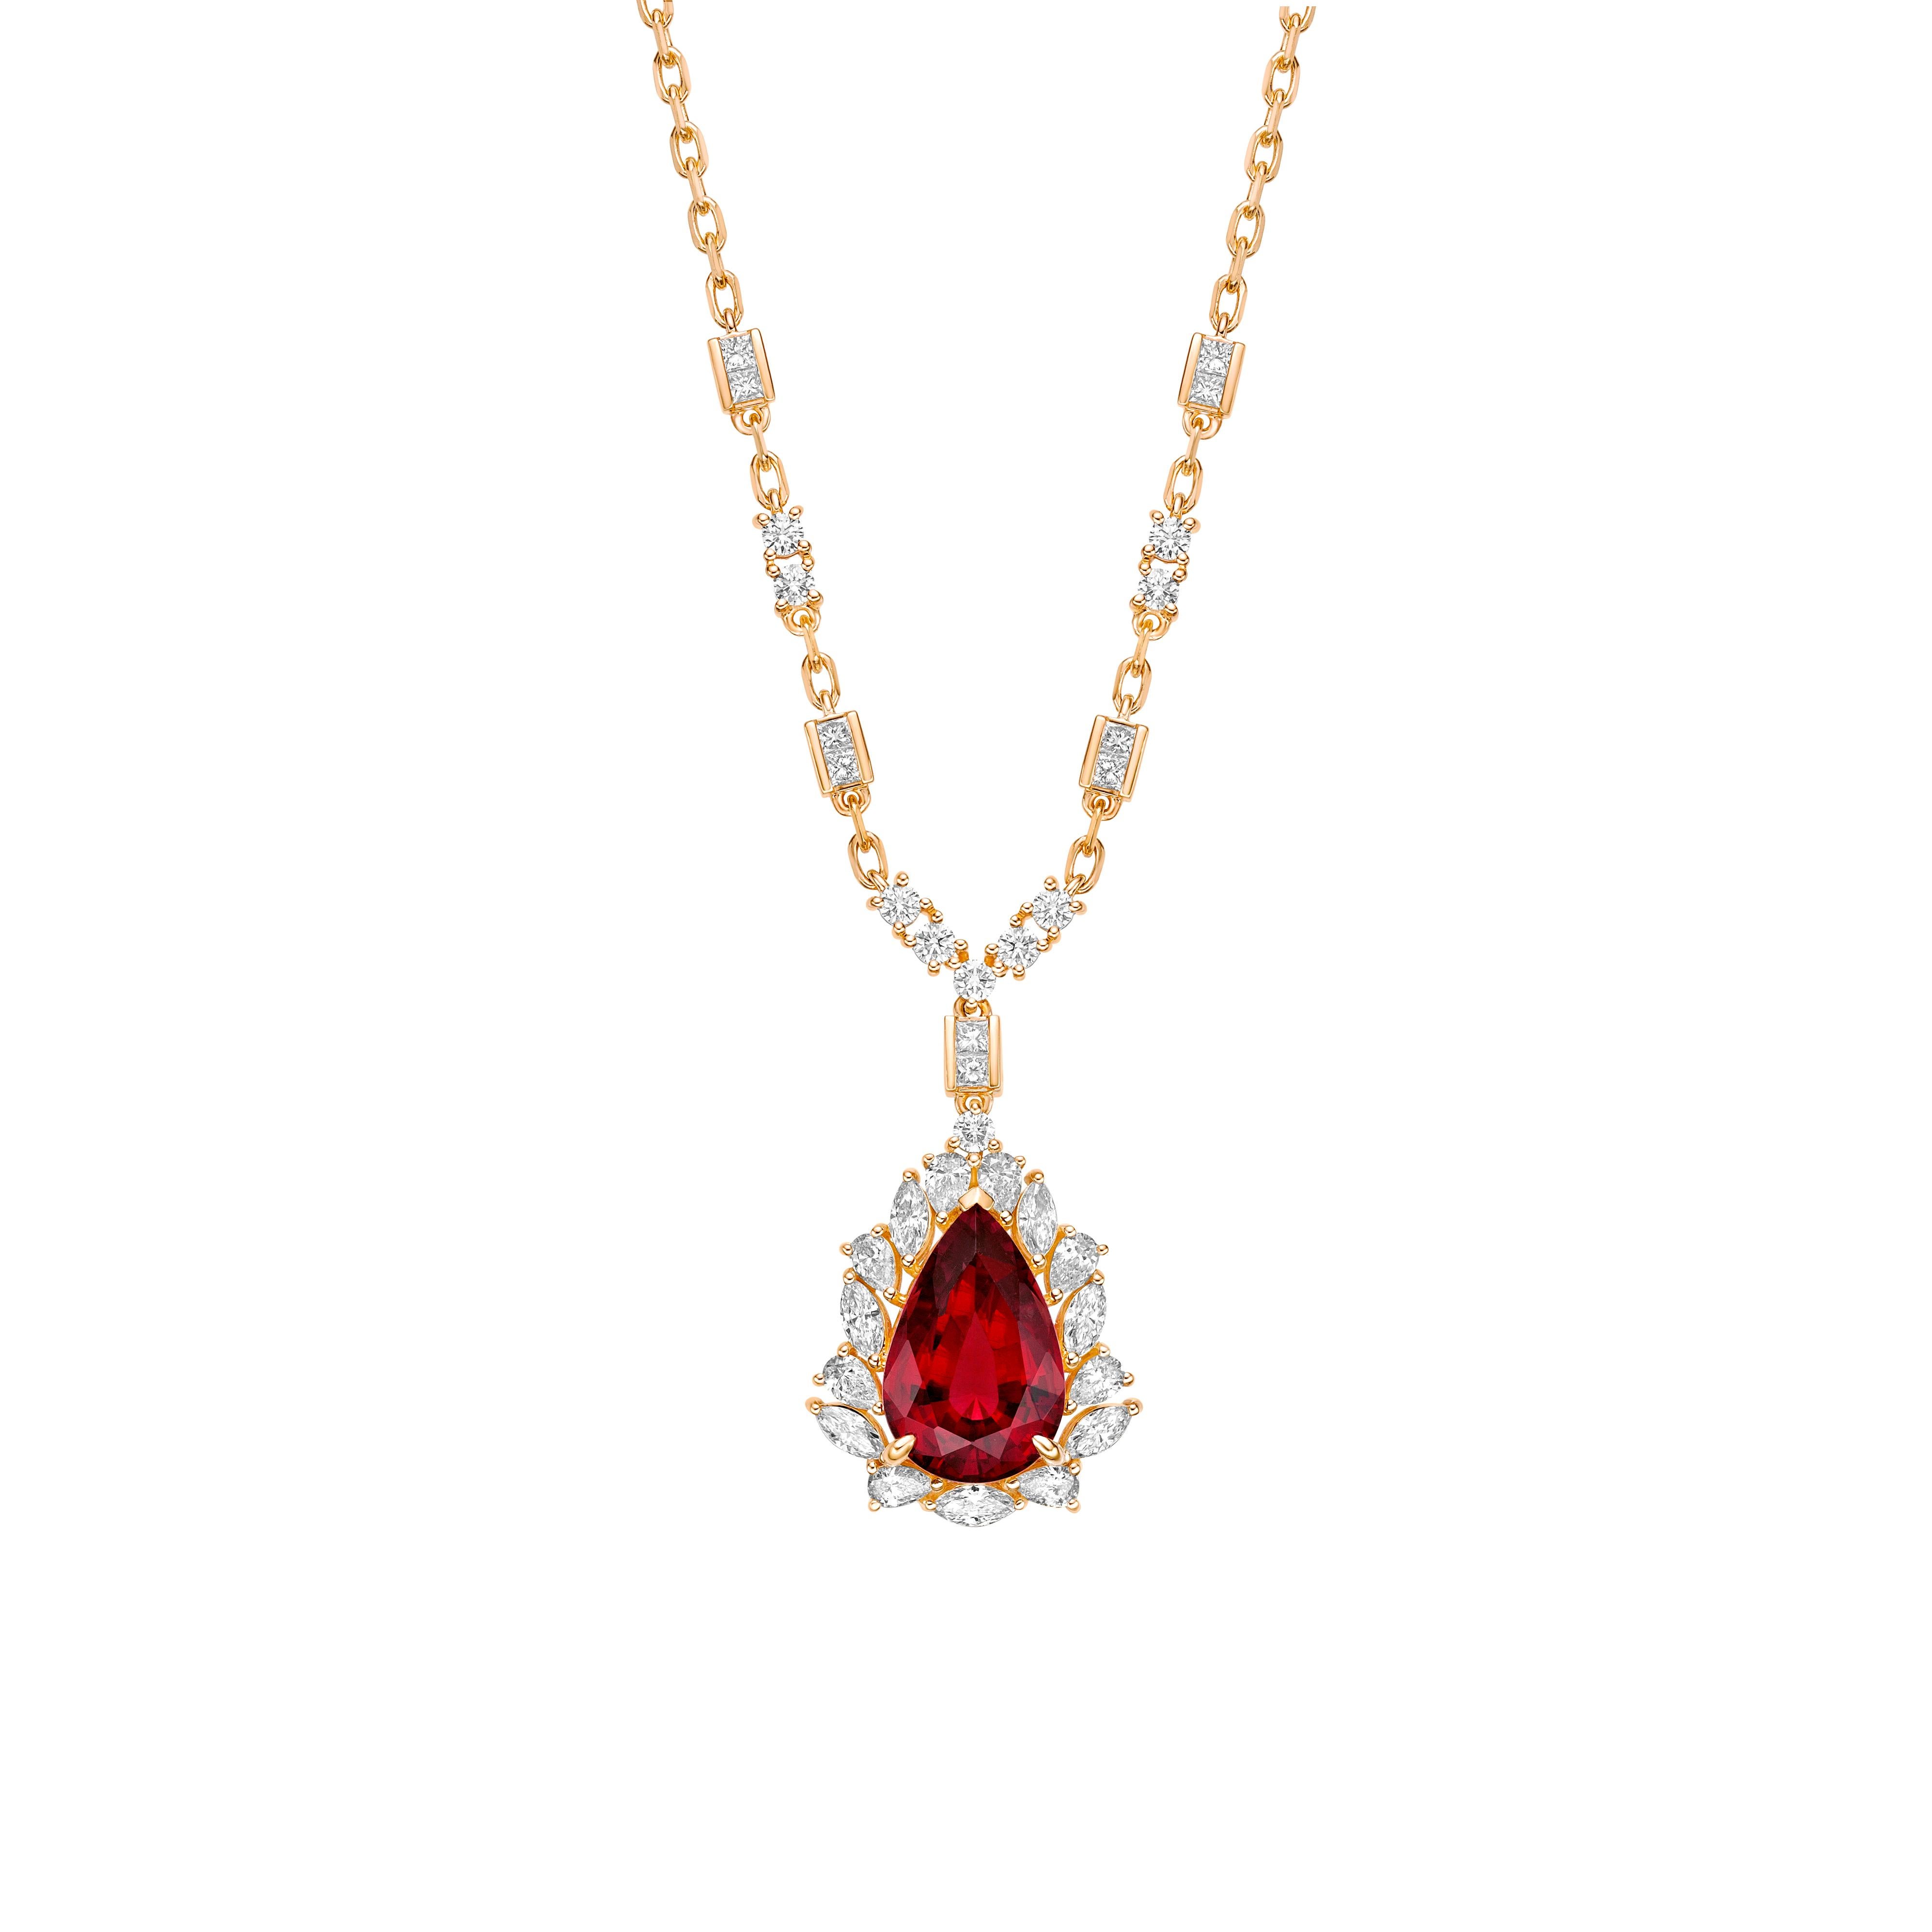 Contemporary 8.047 Carat Rubellite Necklace in 18Karat Yellow Gold with White Diamond. For Sale